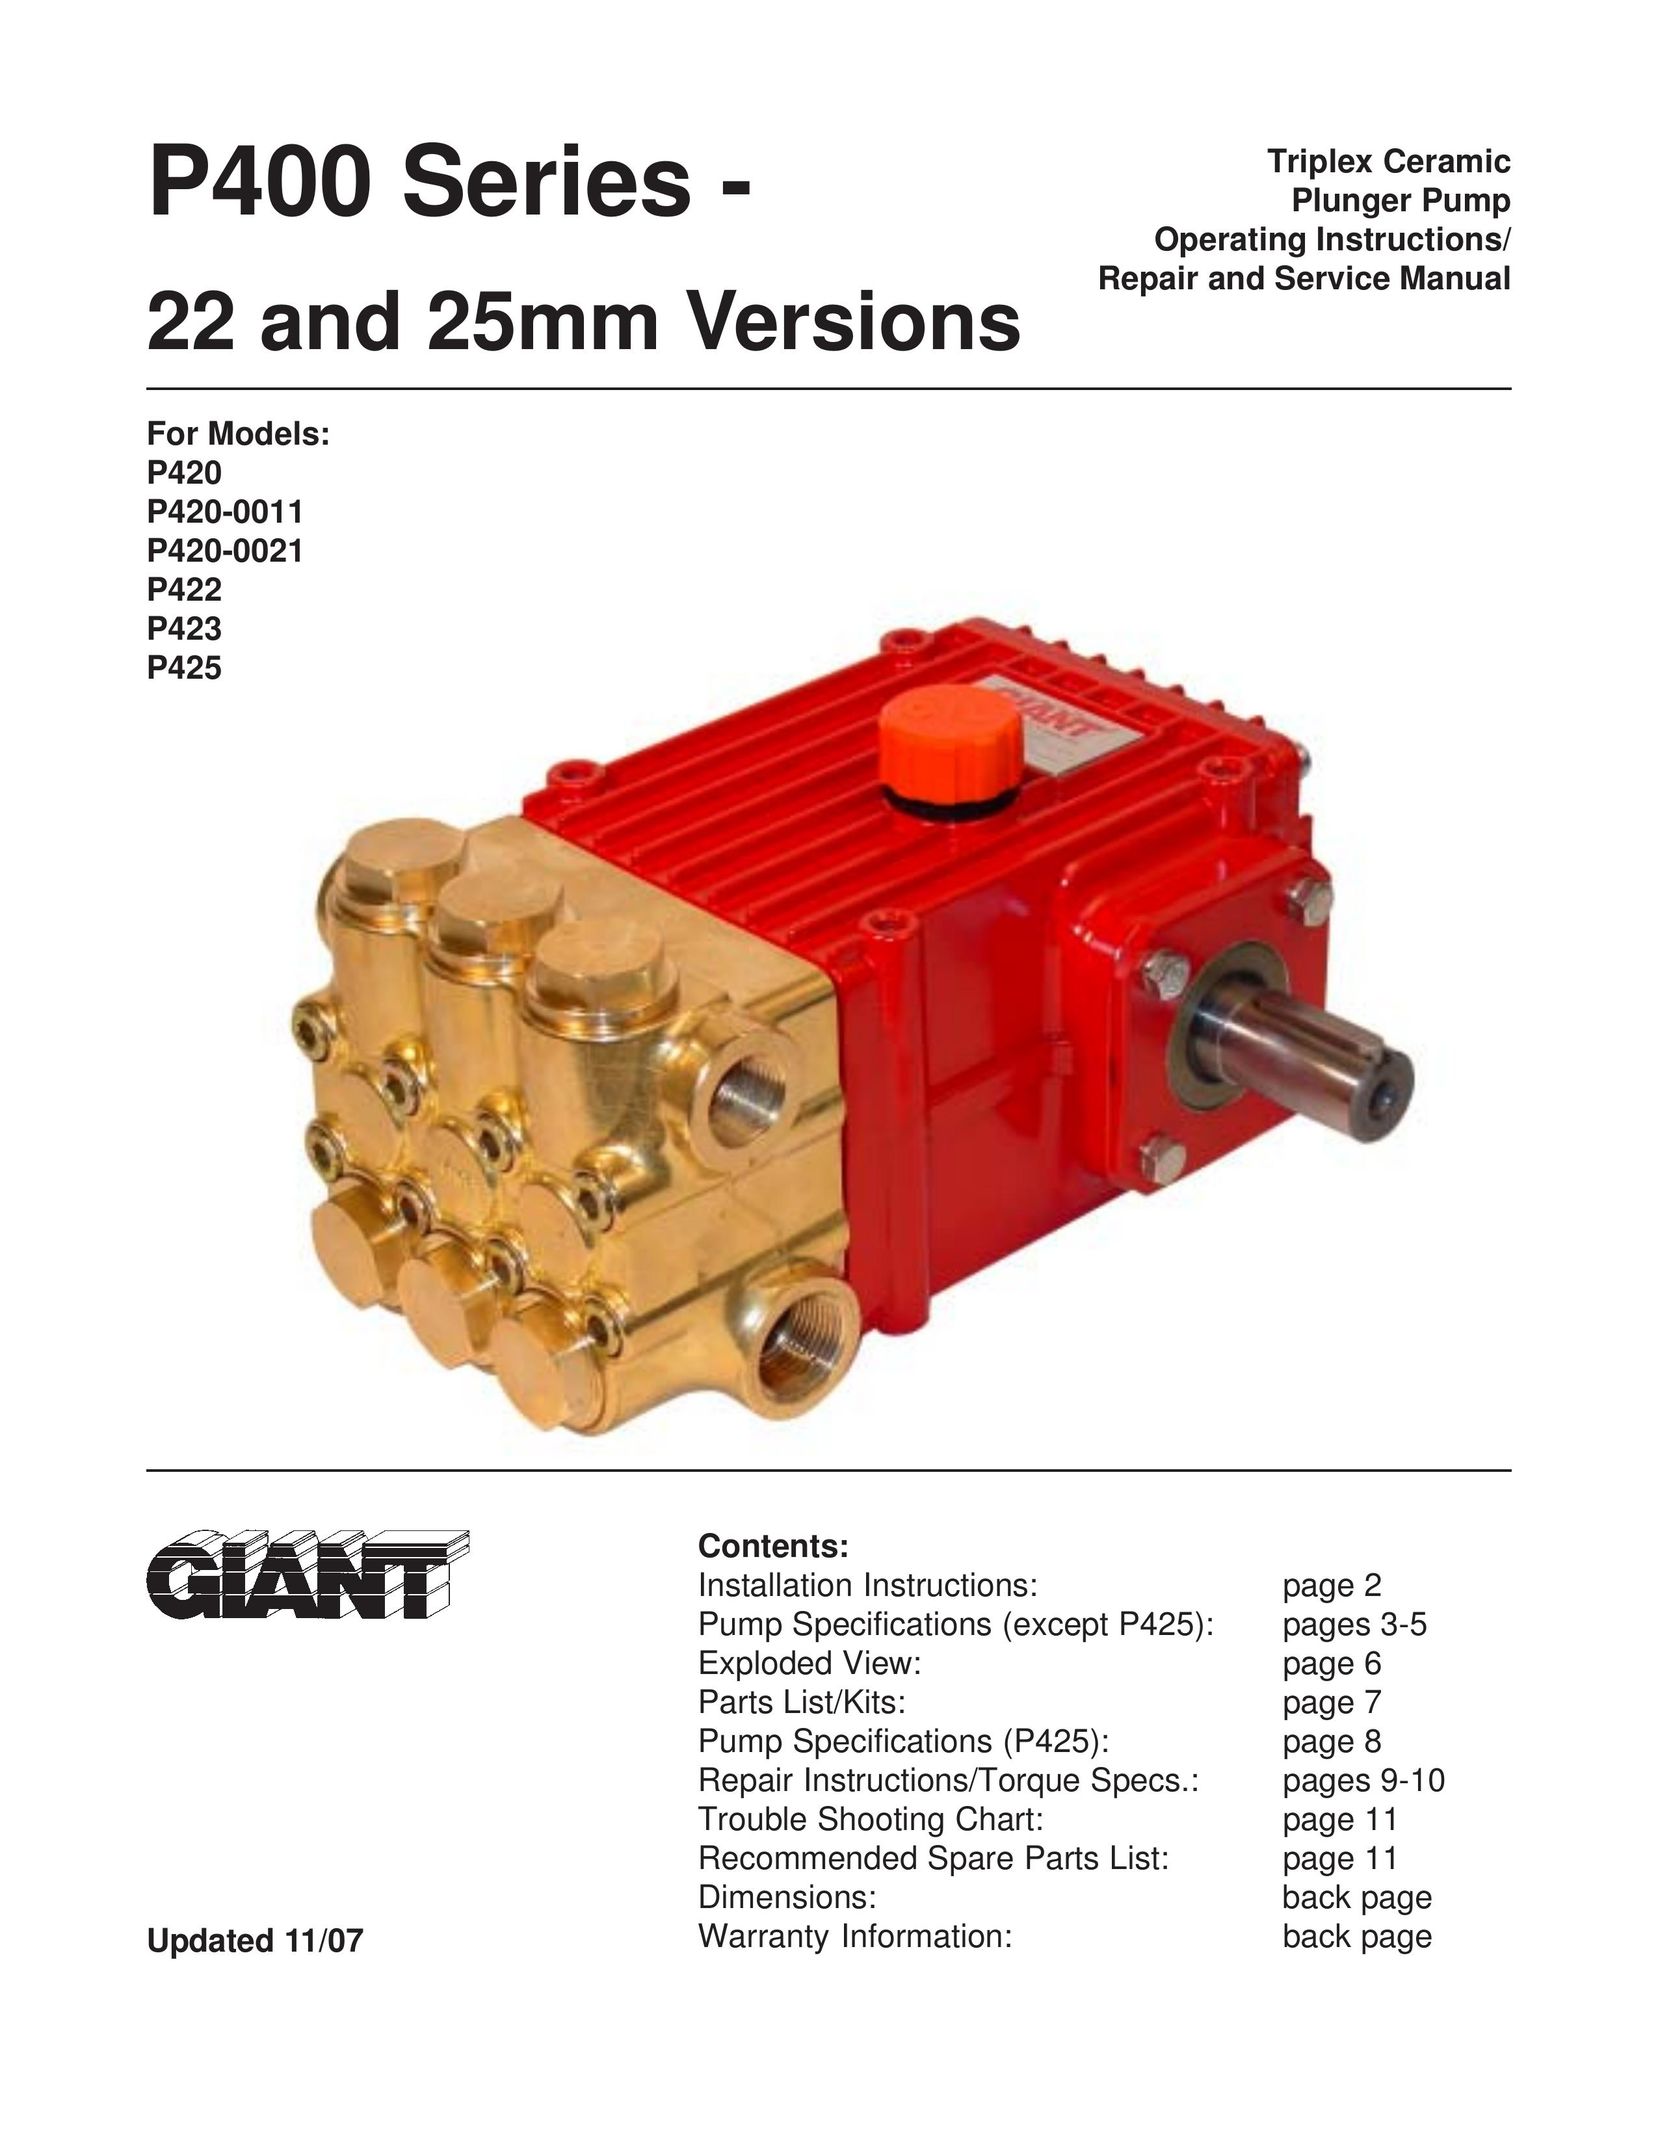 Giant P420 Septic System User Manual